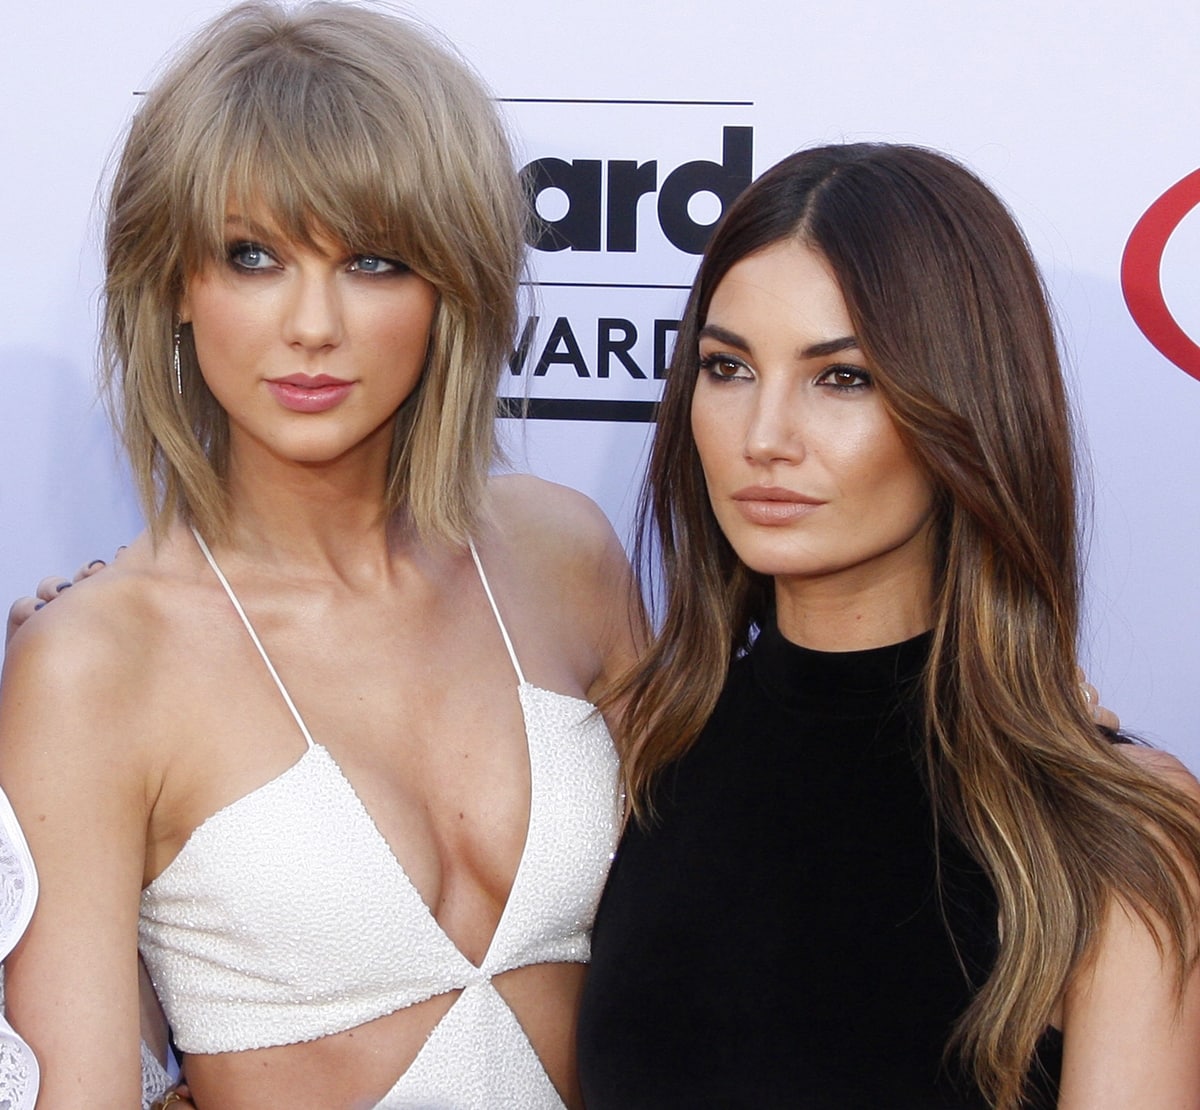 Lily Aldridge and Taylor Swift became close friends in 2013 after meeting at a Victoria's Secret show